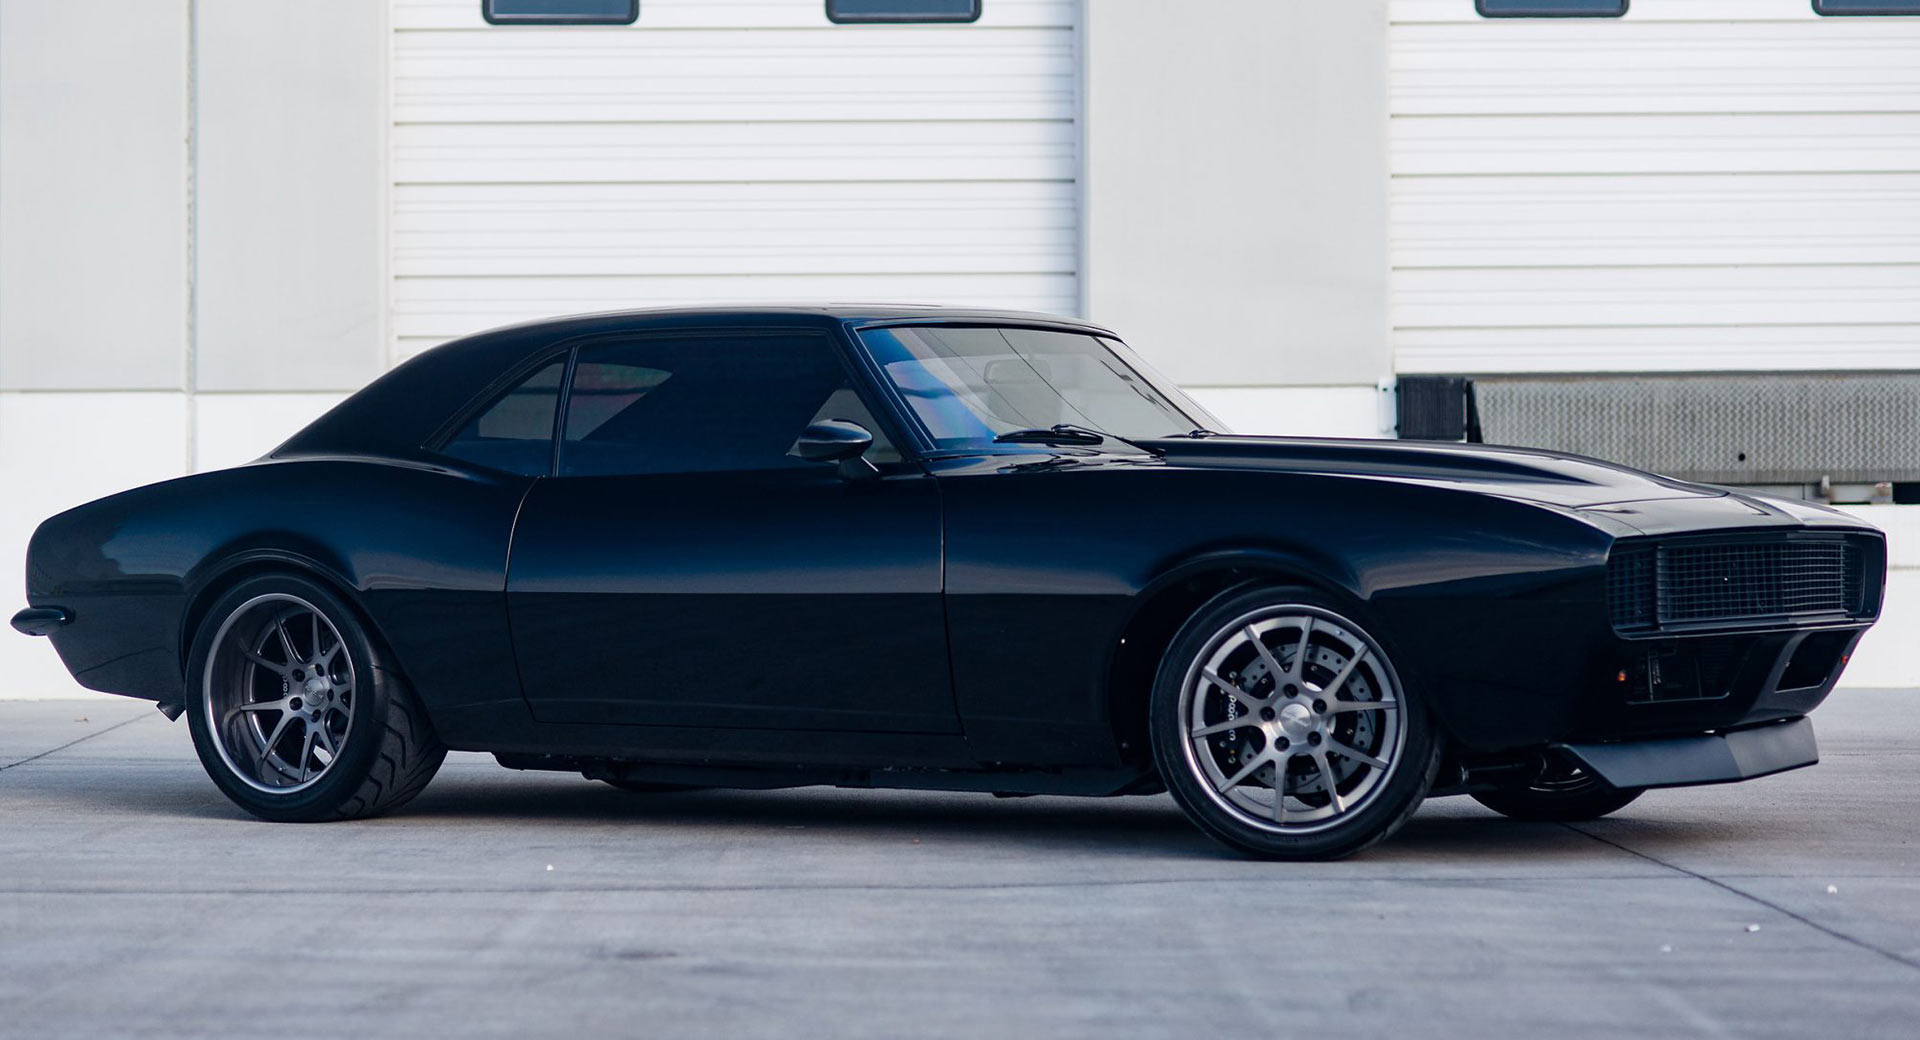 Badass Supercharged 1968 Camaro Restomod Is Pure Fast And Furious Material